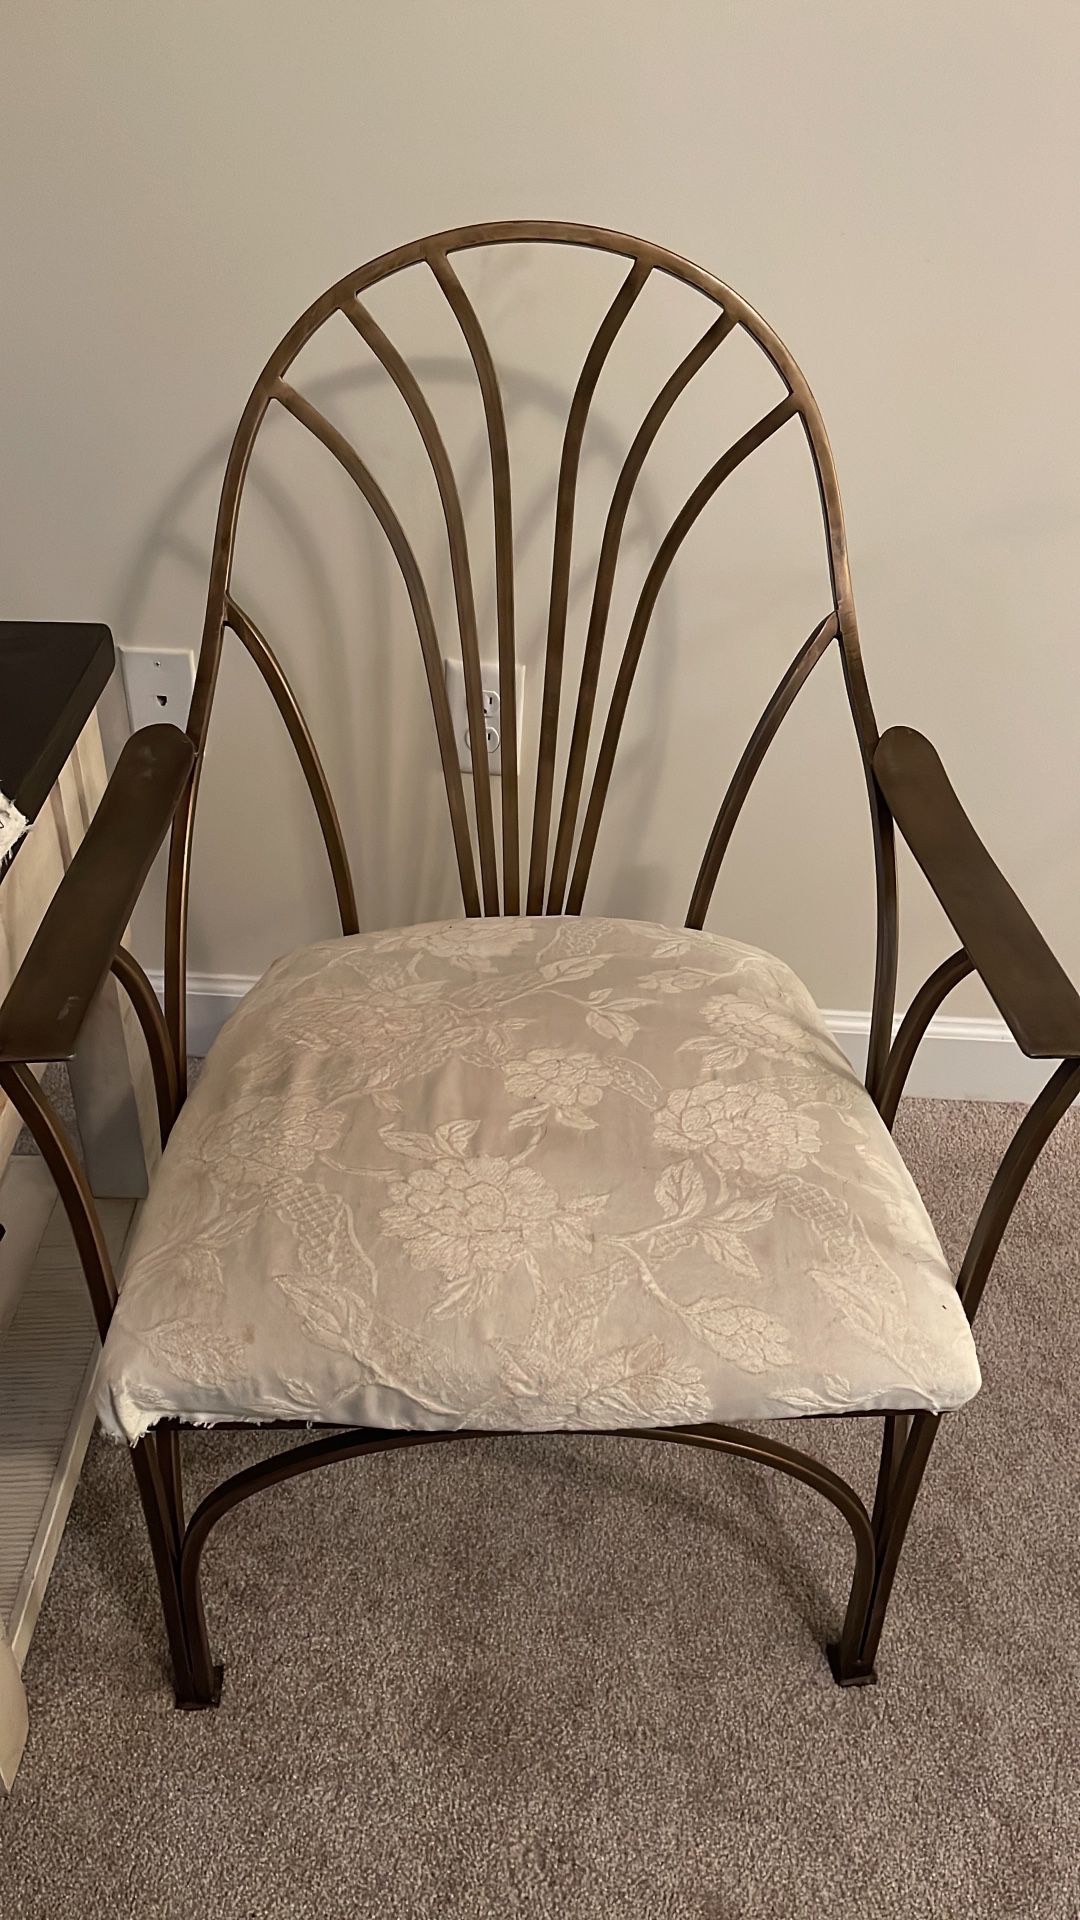 4 Metal Dining Chairs